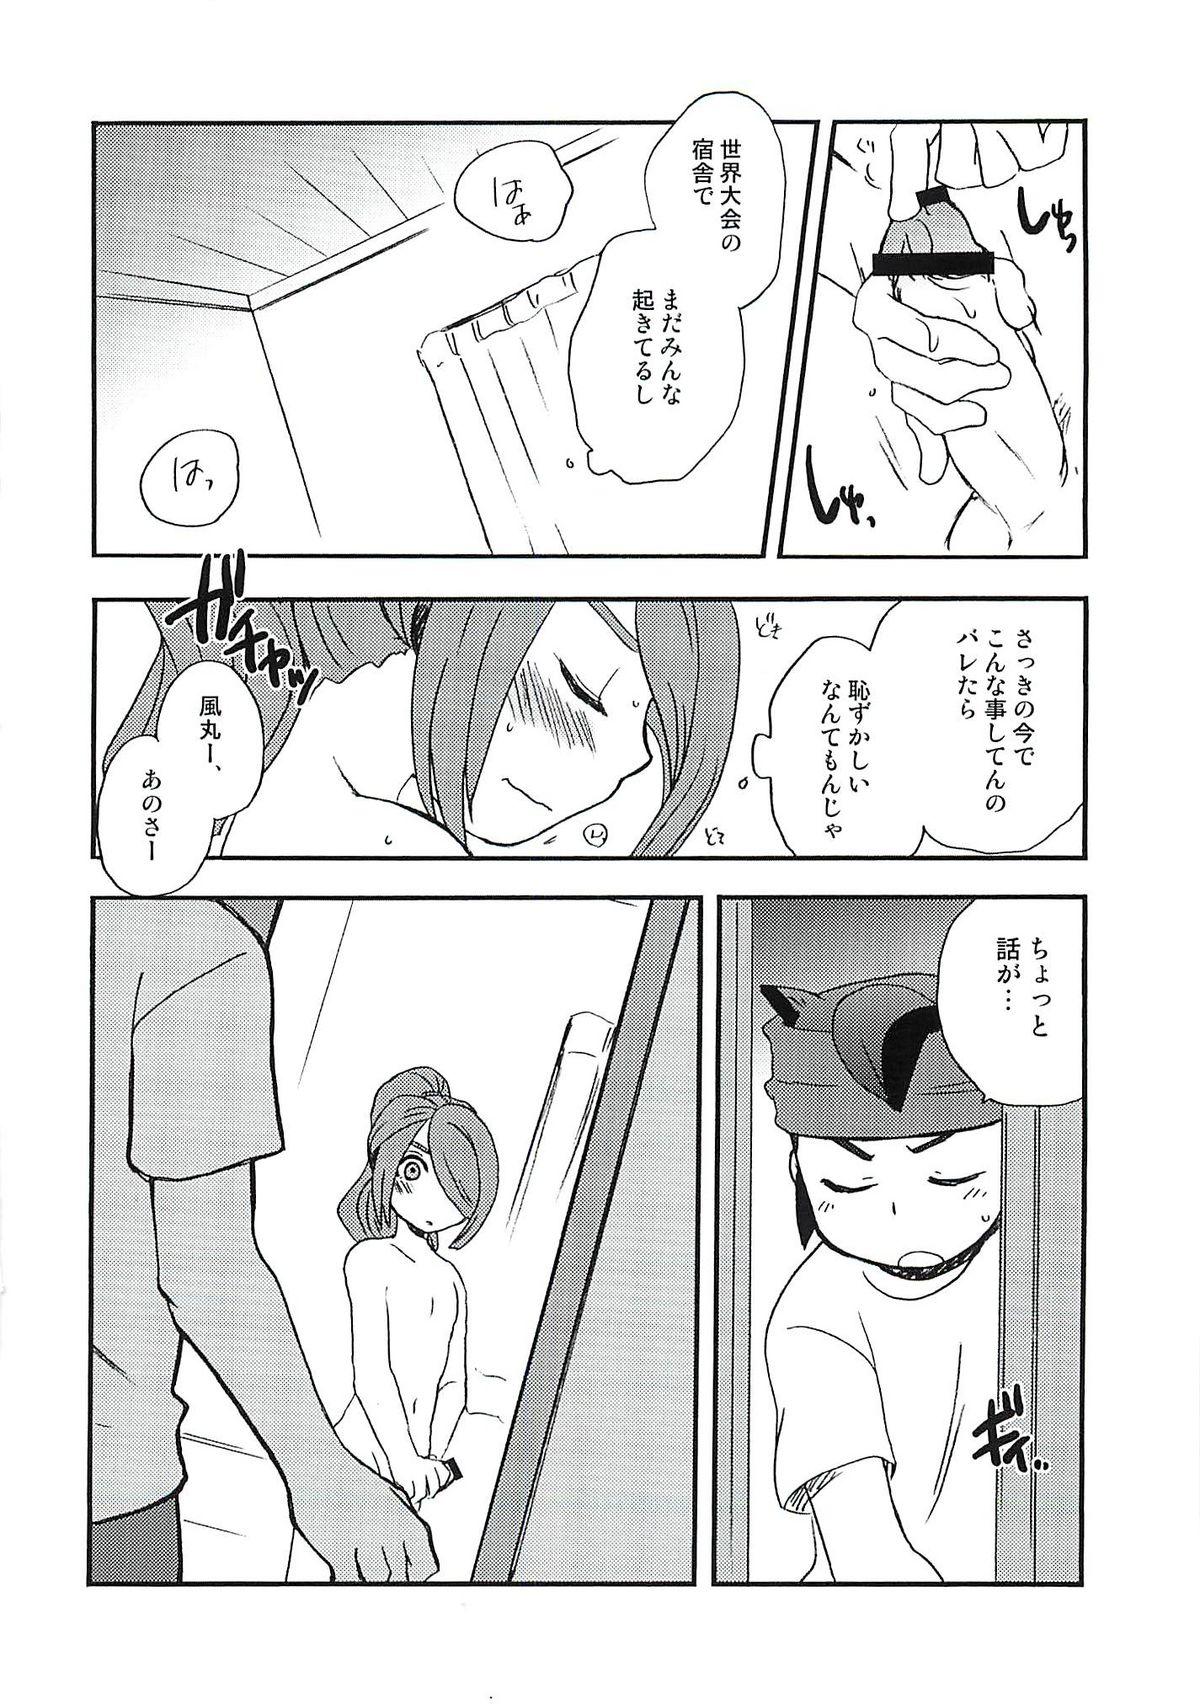 Cumswallow 07/21 - Inazuma eleven Roughsex - Page 11